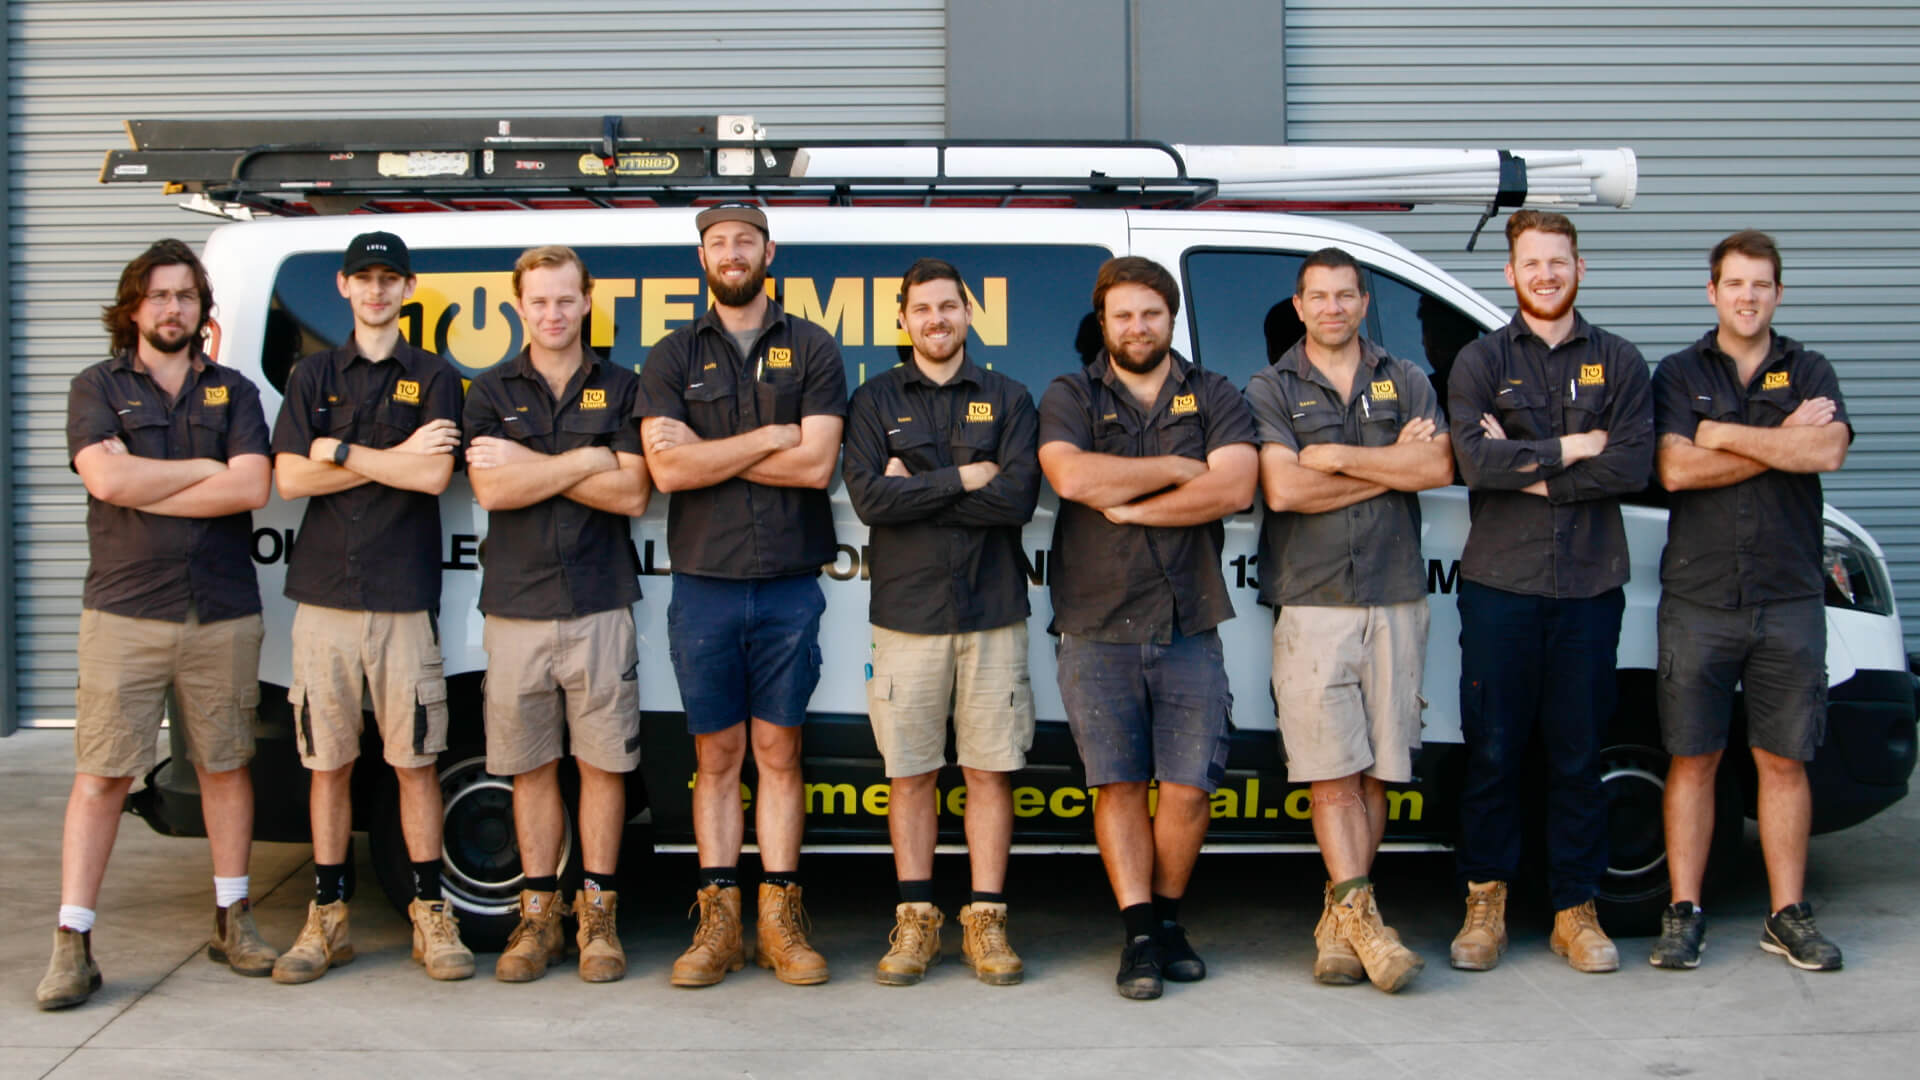 The Tenmen Electrical team of electricians standing in front of the van on the Sunshine Coast.